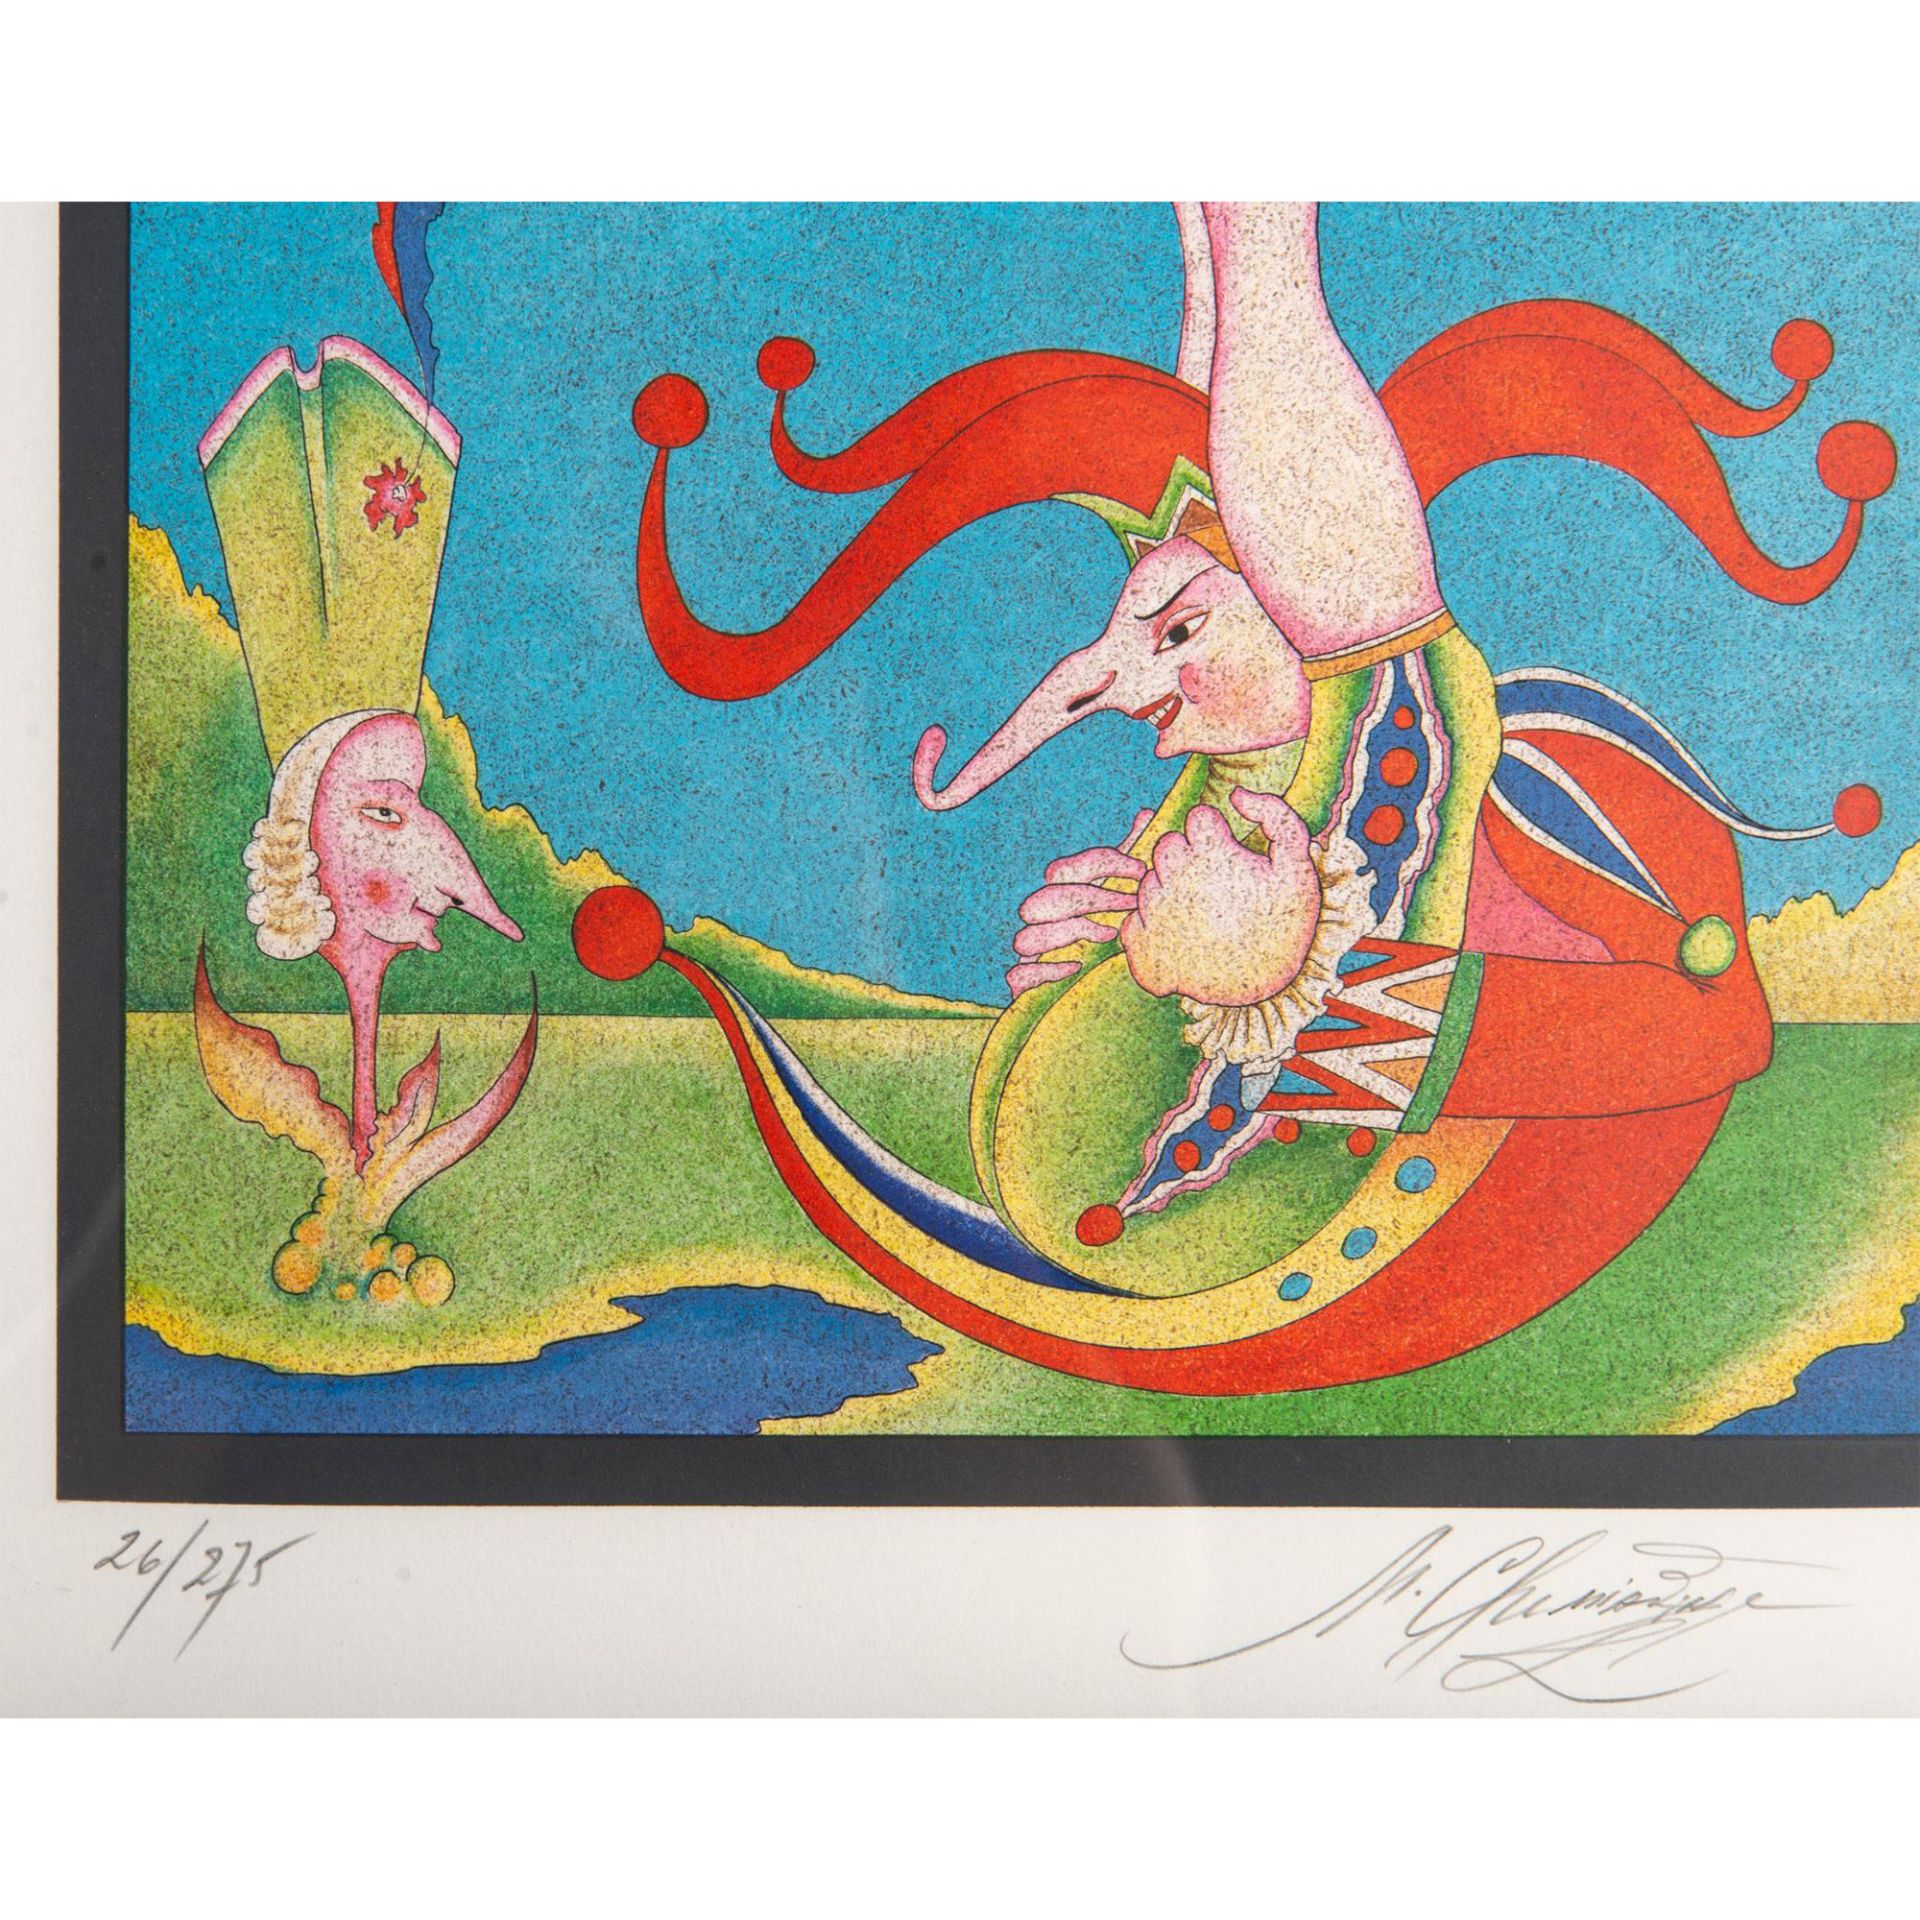 Mihail Chemiakin (Russian/French, b.1943) Color Lithograph on Velin Paper, Signed - Image 4 of 7